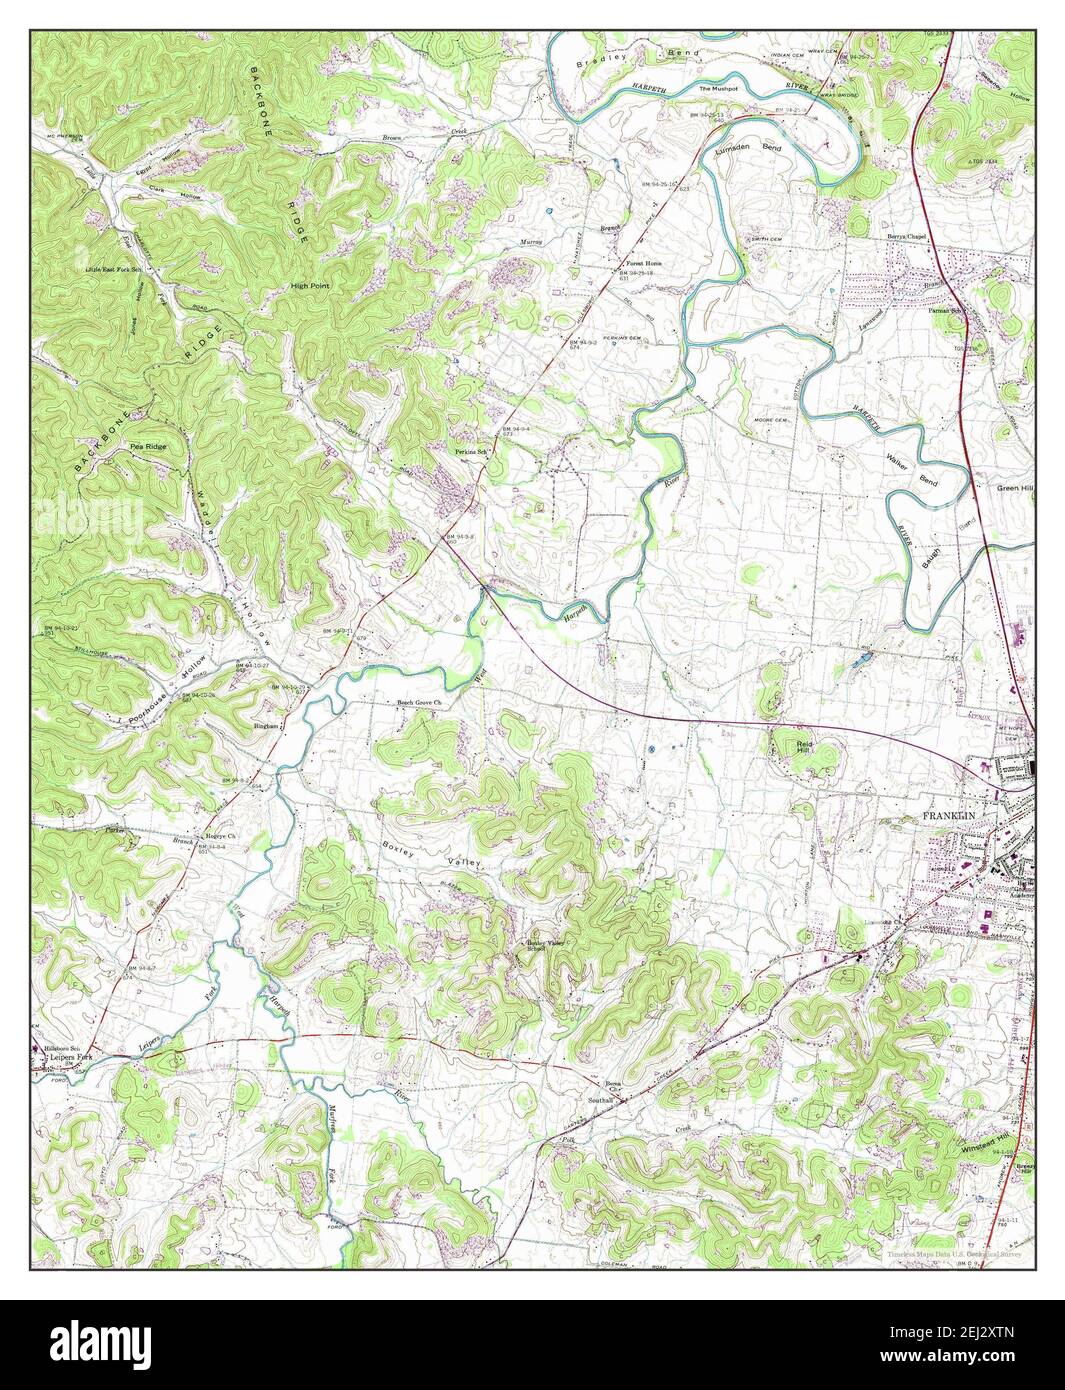 Leipers Fork, Tennessee, map 1946, 1:24000, United States of America by Timeless Maps, data U.S. Geological Survey Stock Photo